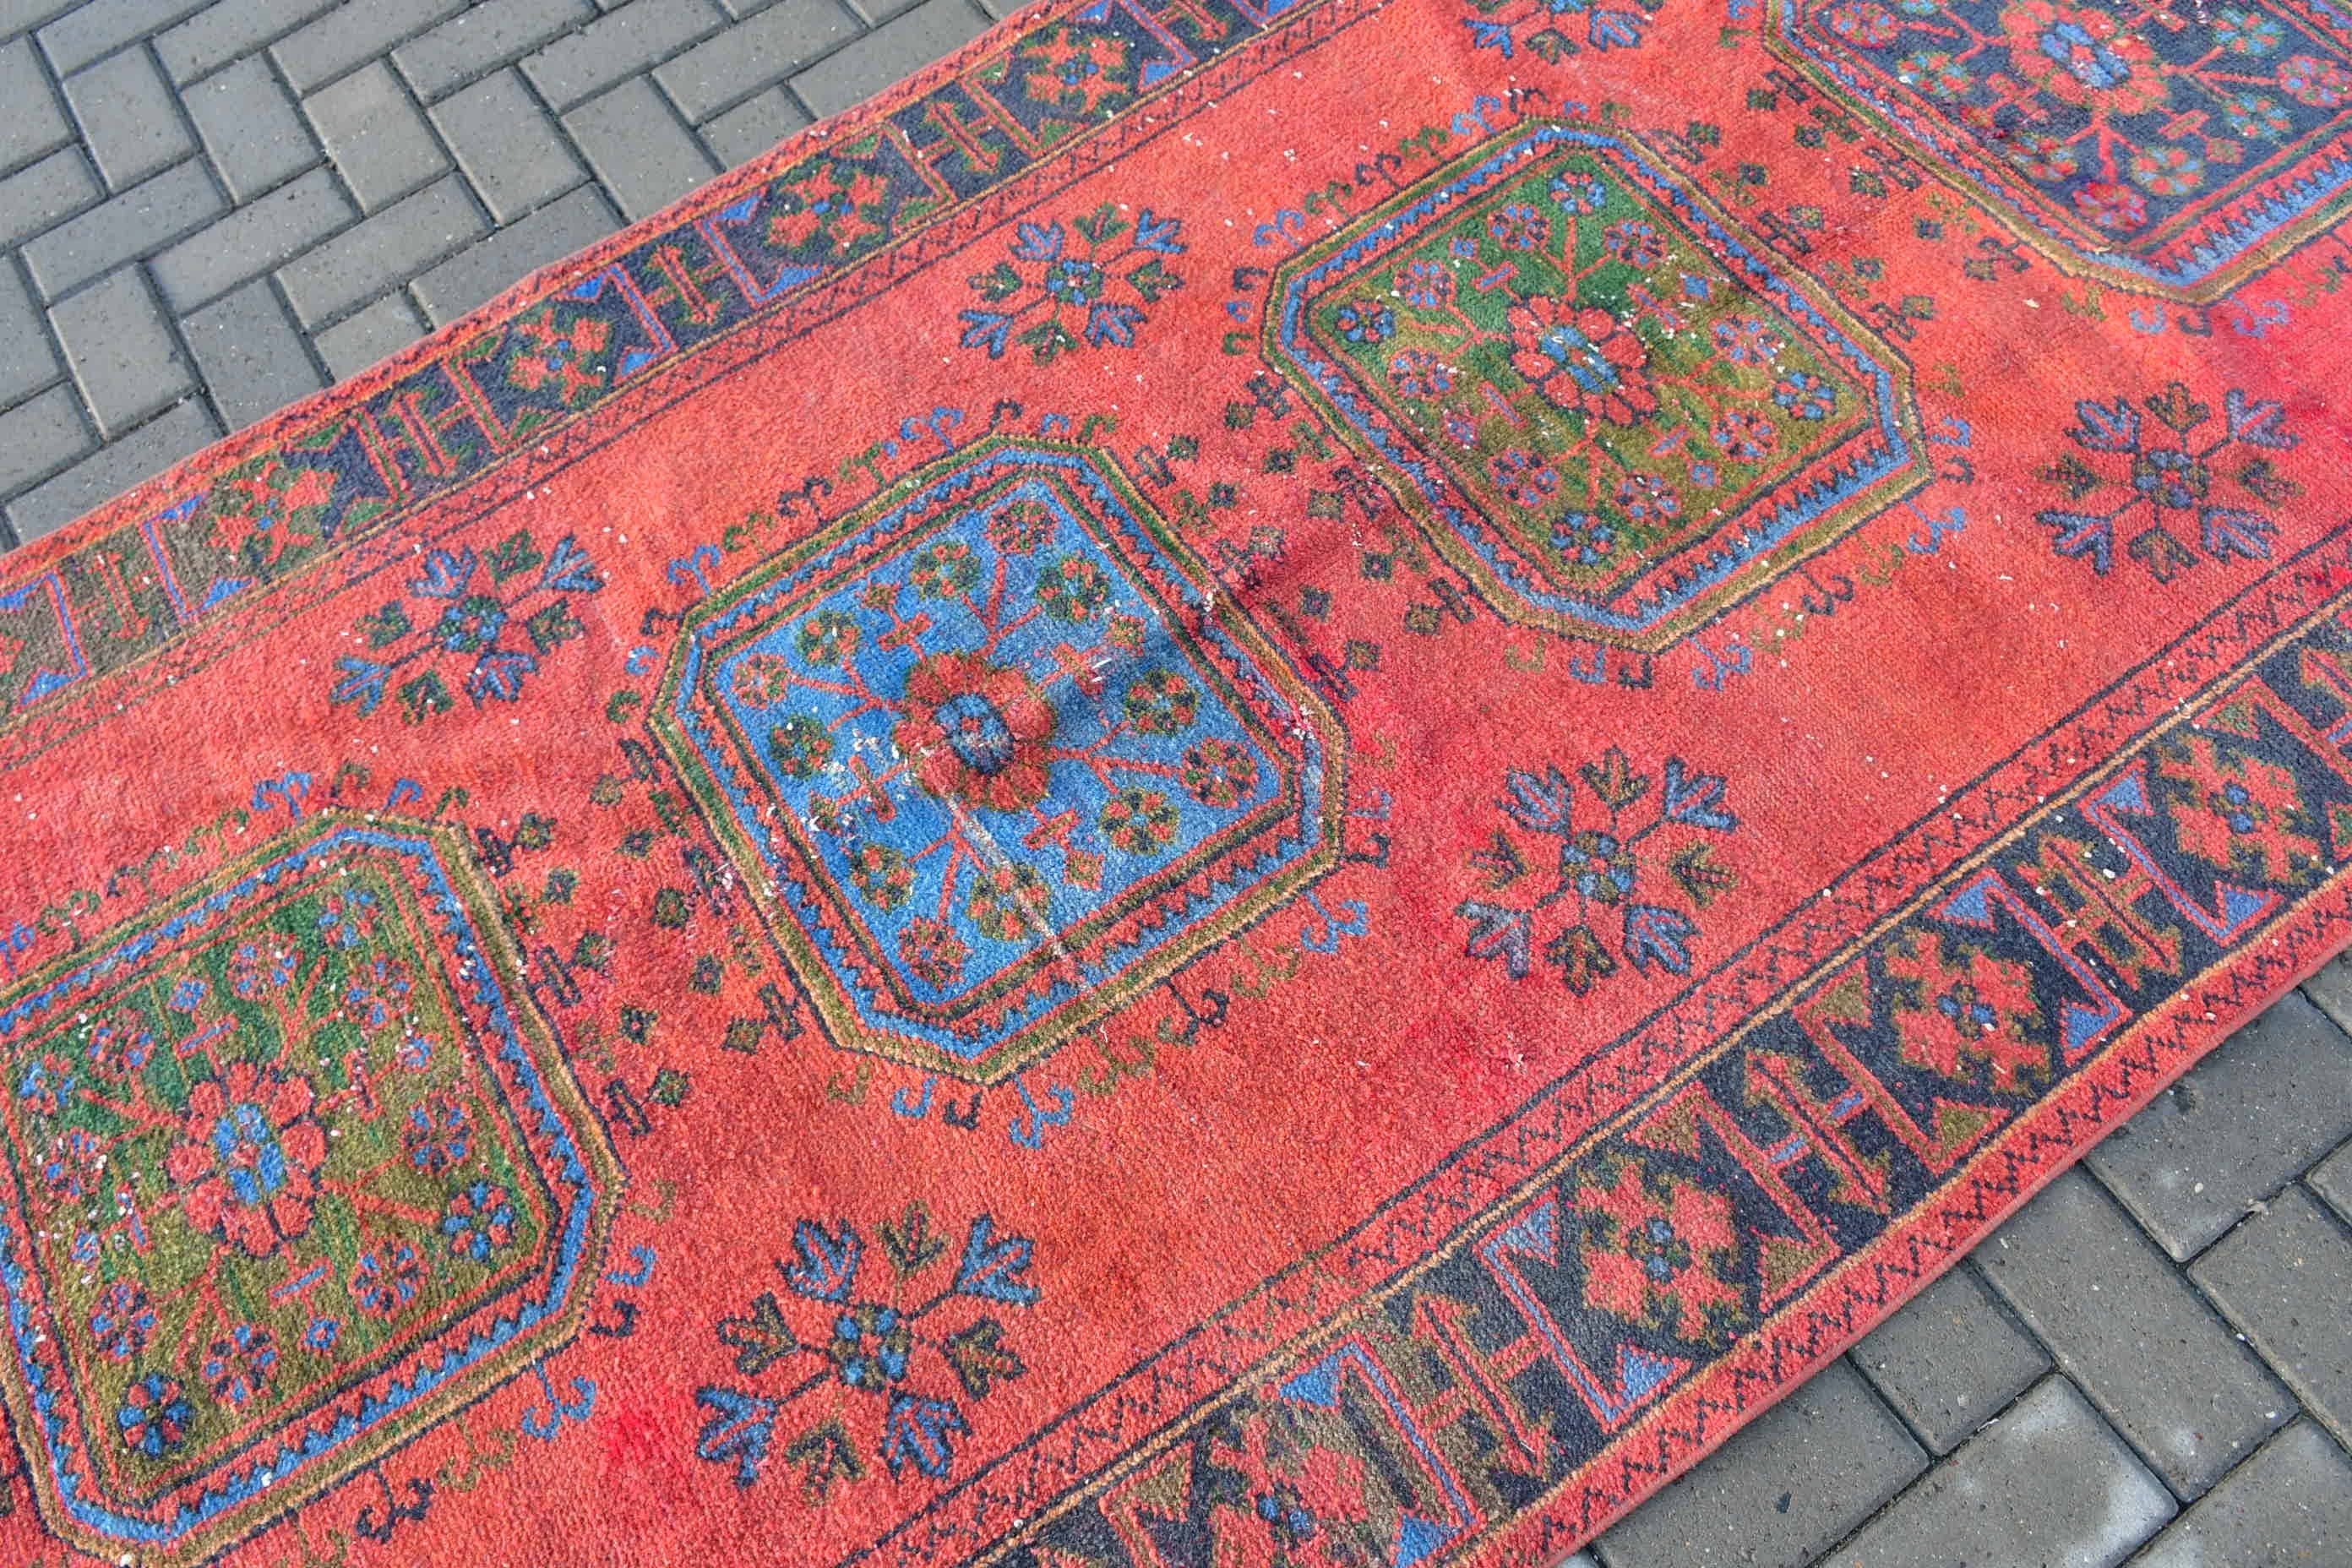 Vintage Rug, Stair Rug, Art Rug, 4.5x11.3 ft Runner Rug, Rugs for Kitchen, Red Home Decor Rugs, Antique Rug, Turkish Rugs